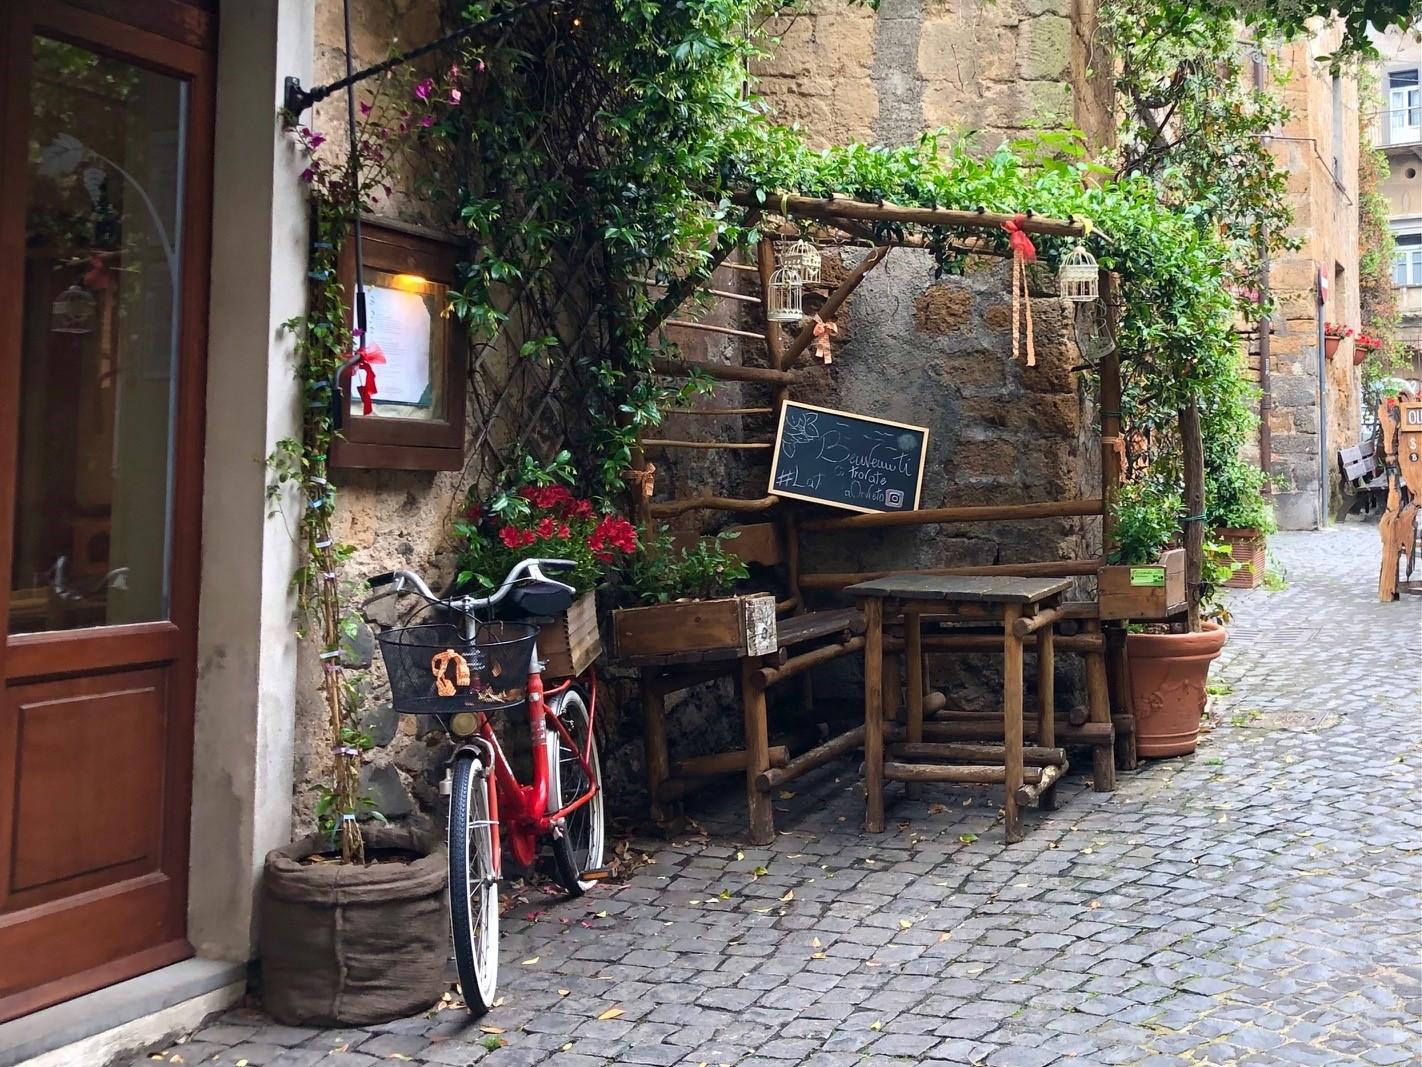 A bicycle leaned next to a doorway in a sidestreet of Orvieto.